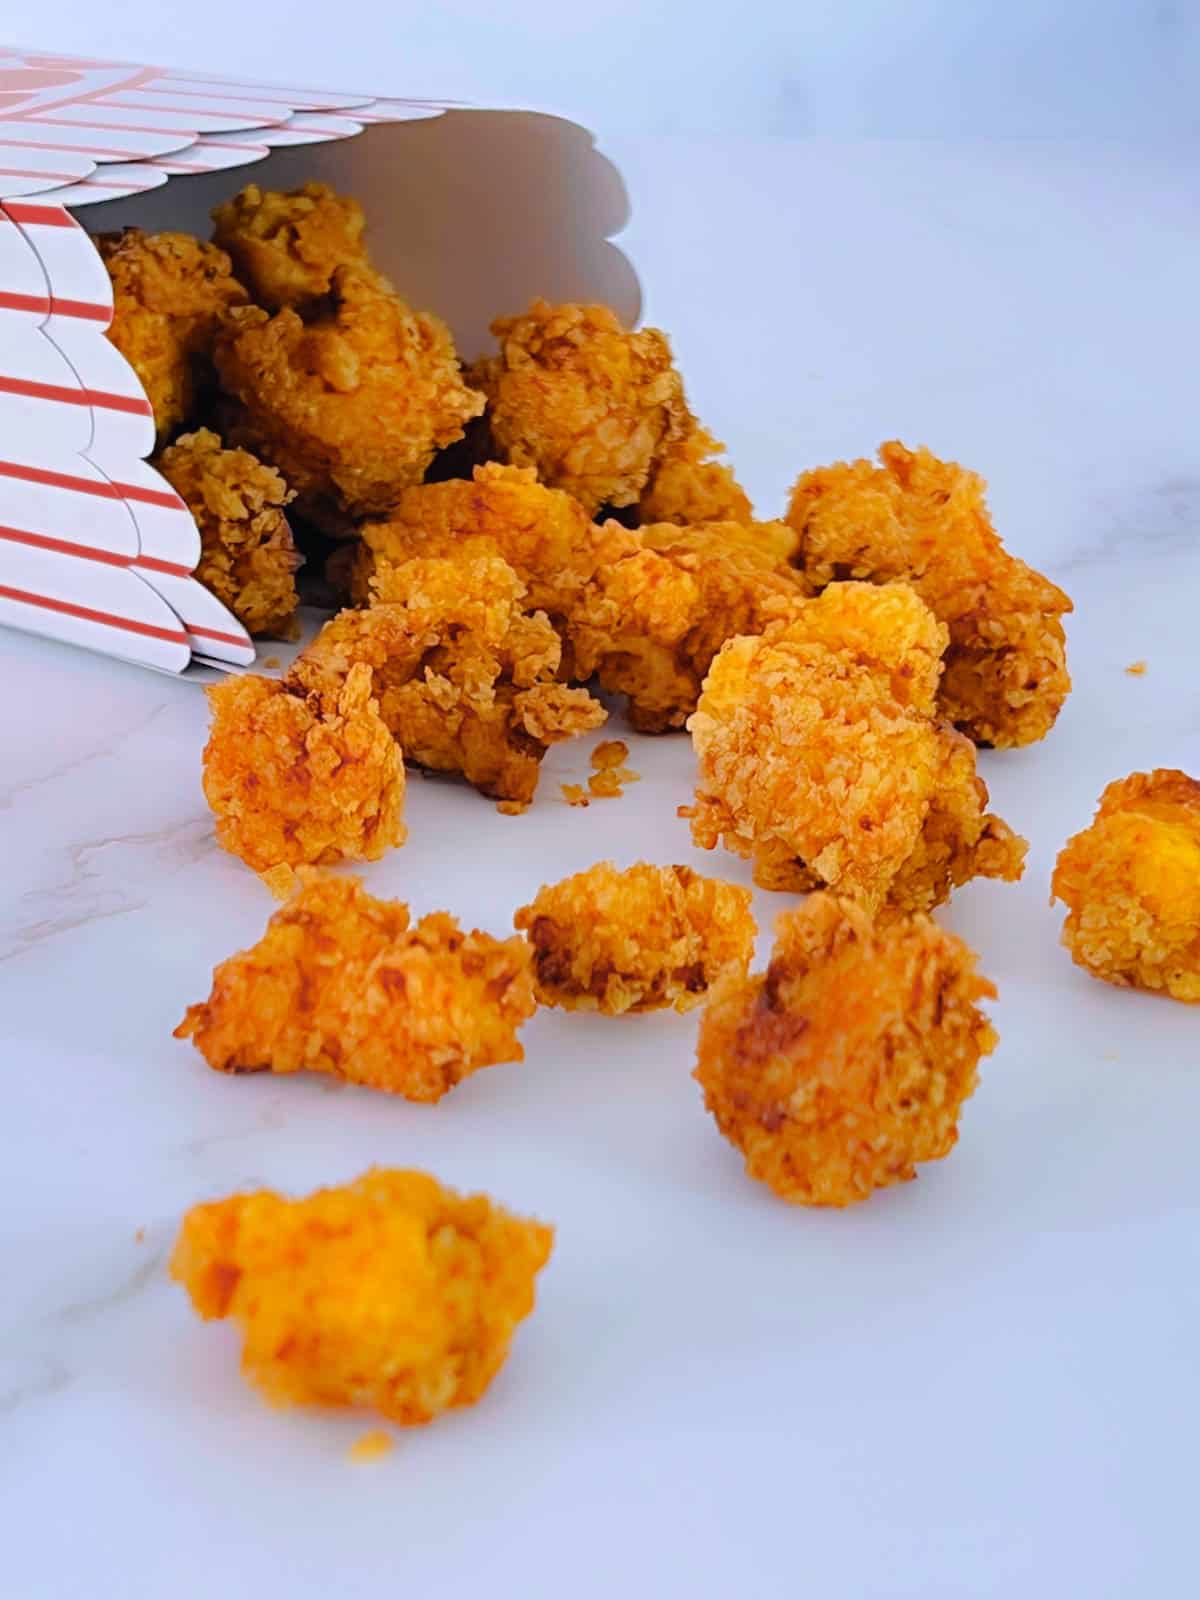 Popcorn chicken falling off from a paper box on a marble background.